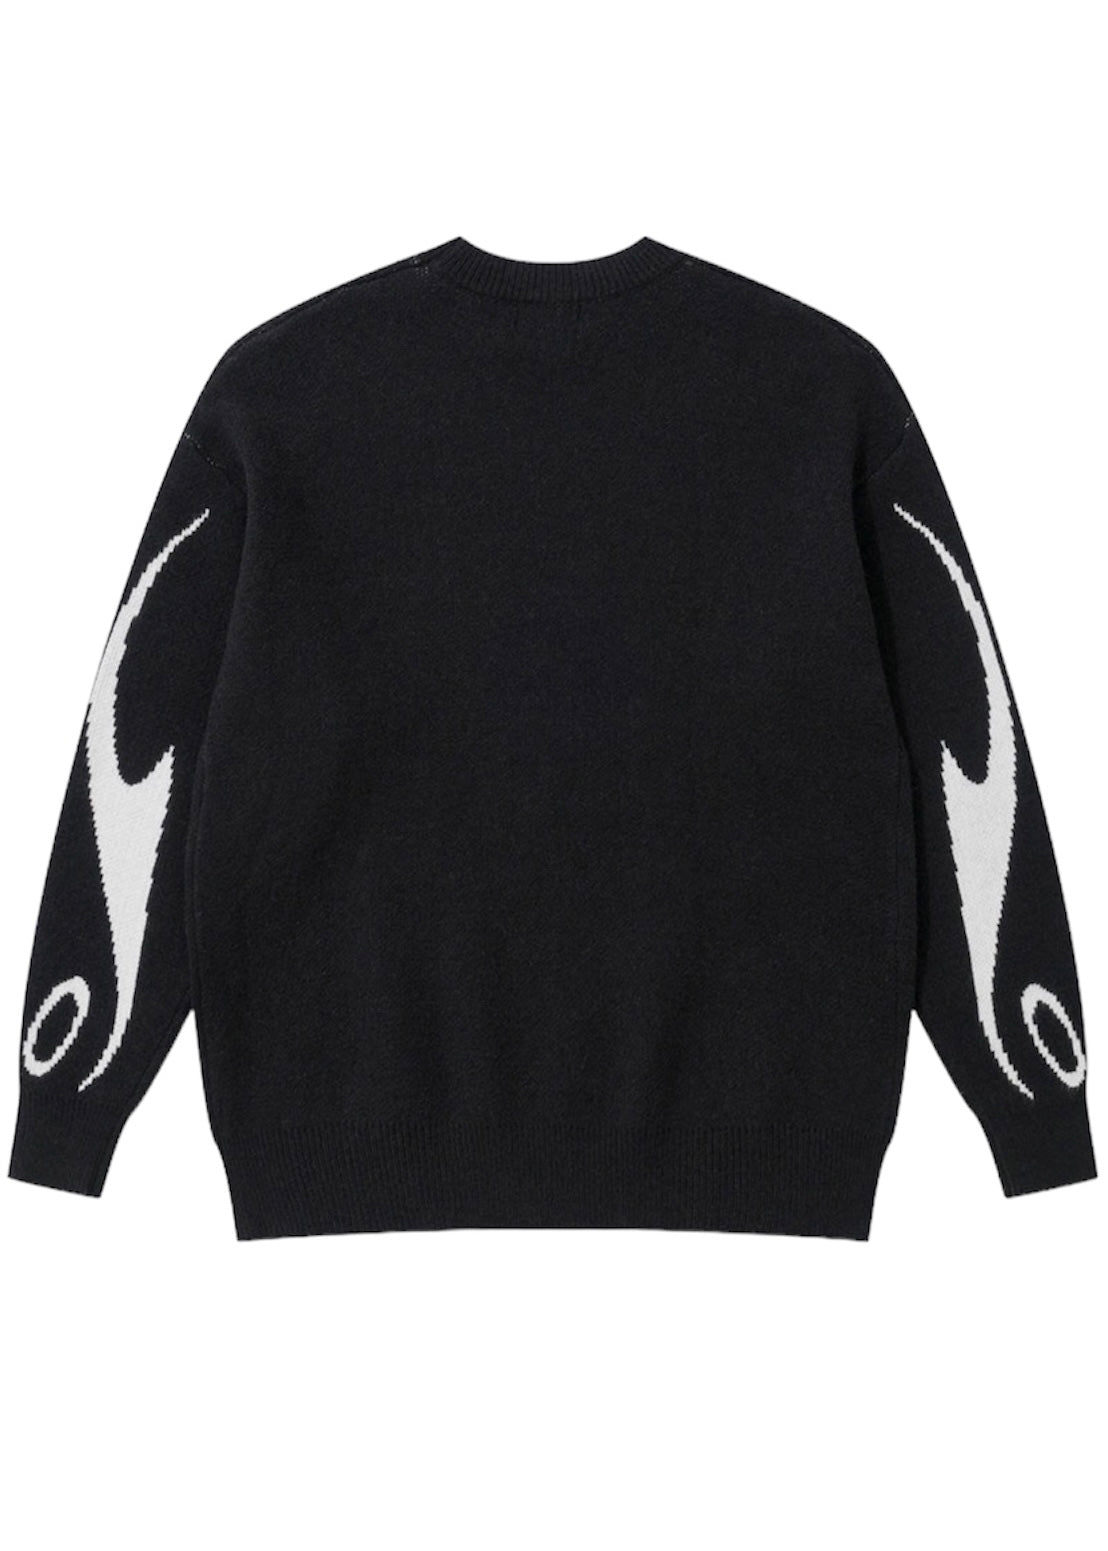 Sports Style Knitted Sweater